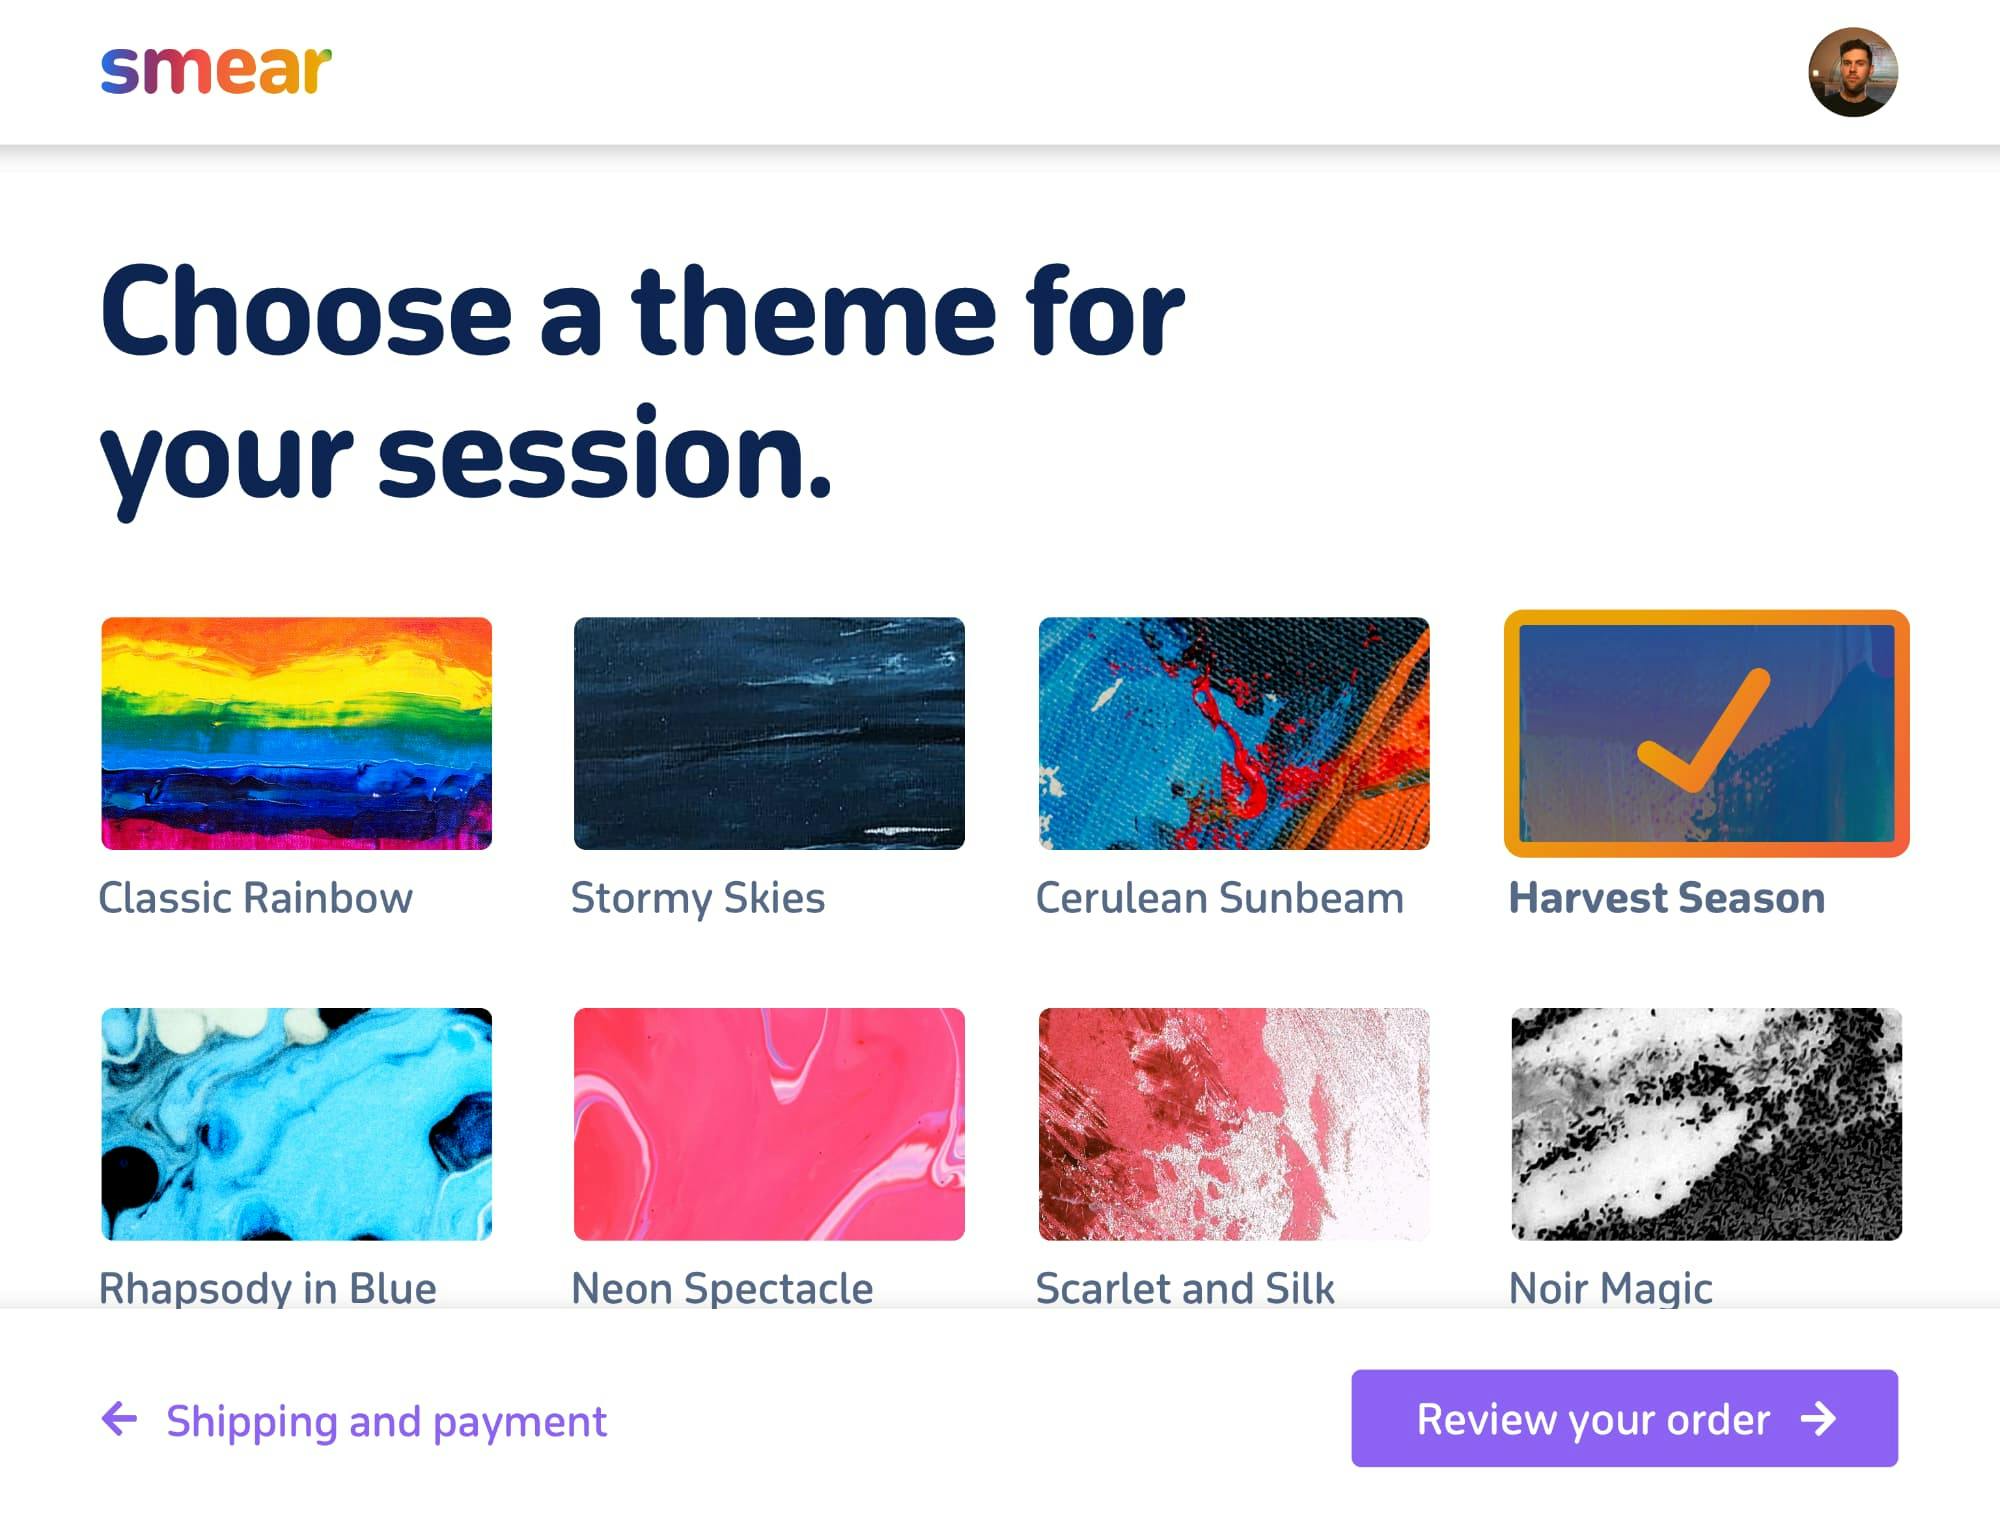 A webpage mockup for choosing a color palette for your Smear session.